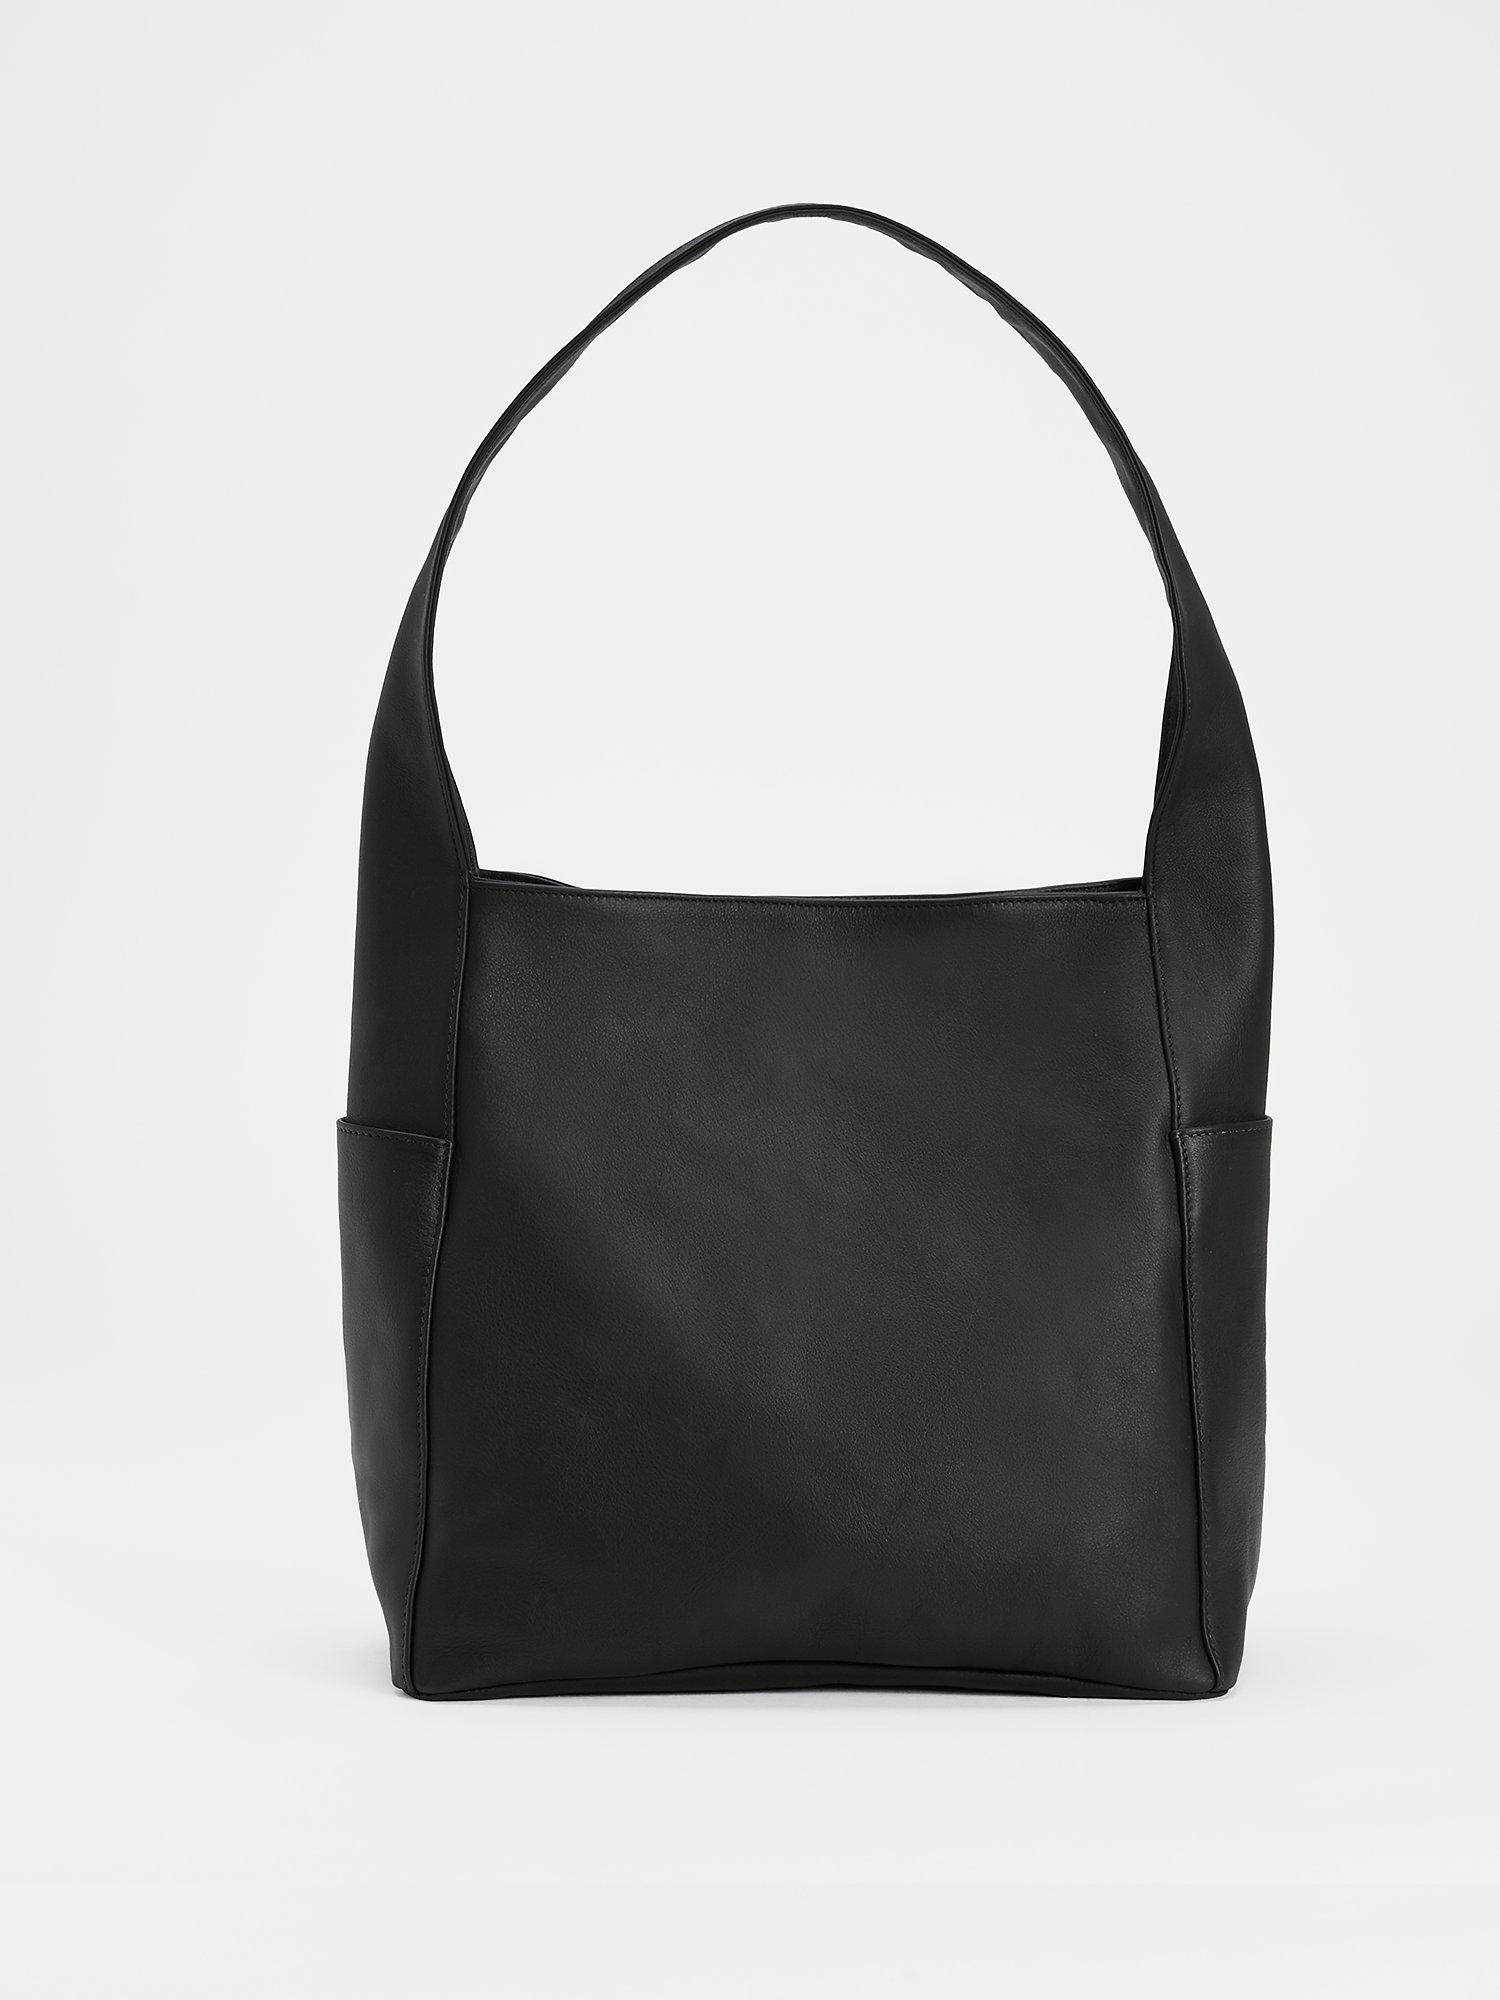 Eileen Fisher Buttery Leather Small Everything Bag in Black - Lyst